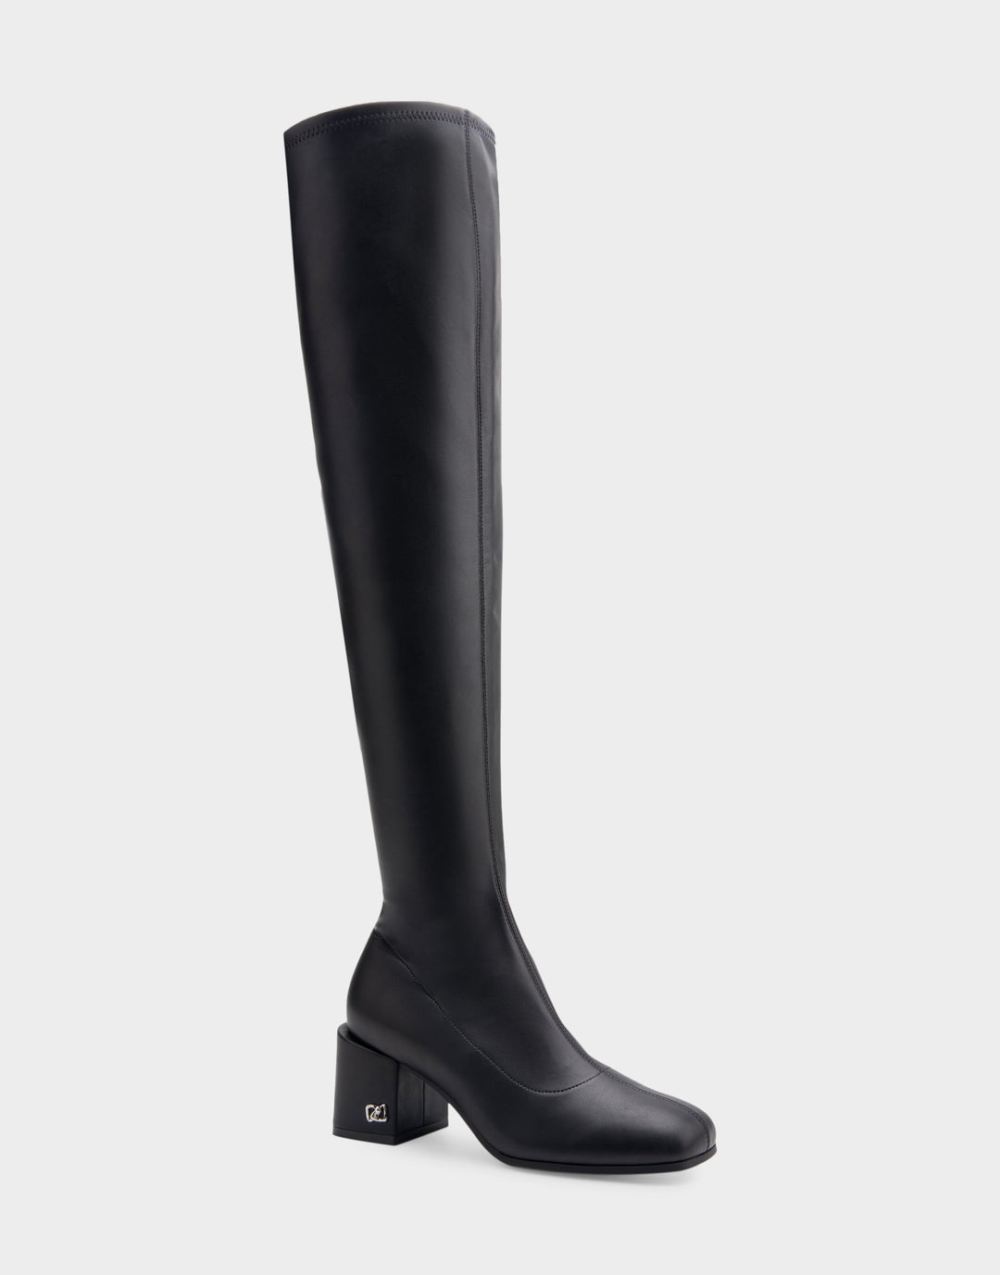 Women's | Oreti Black Stretch Faux Leather Block Heel Over The Knee Boot